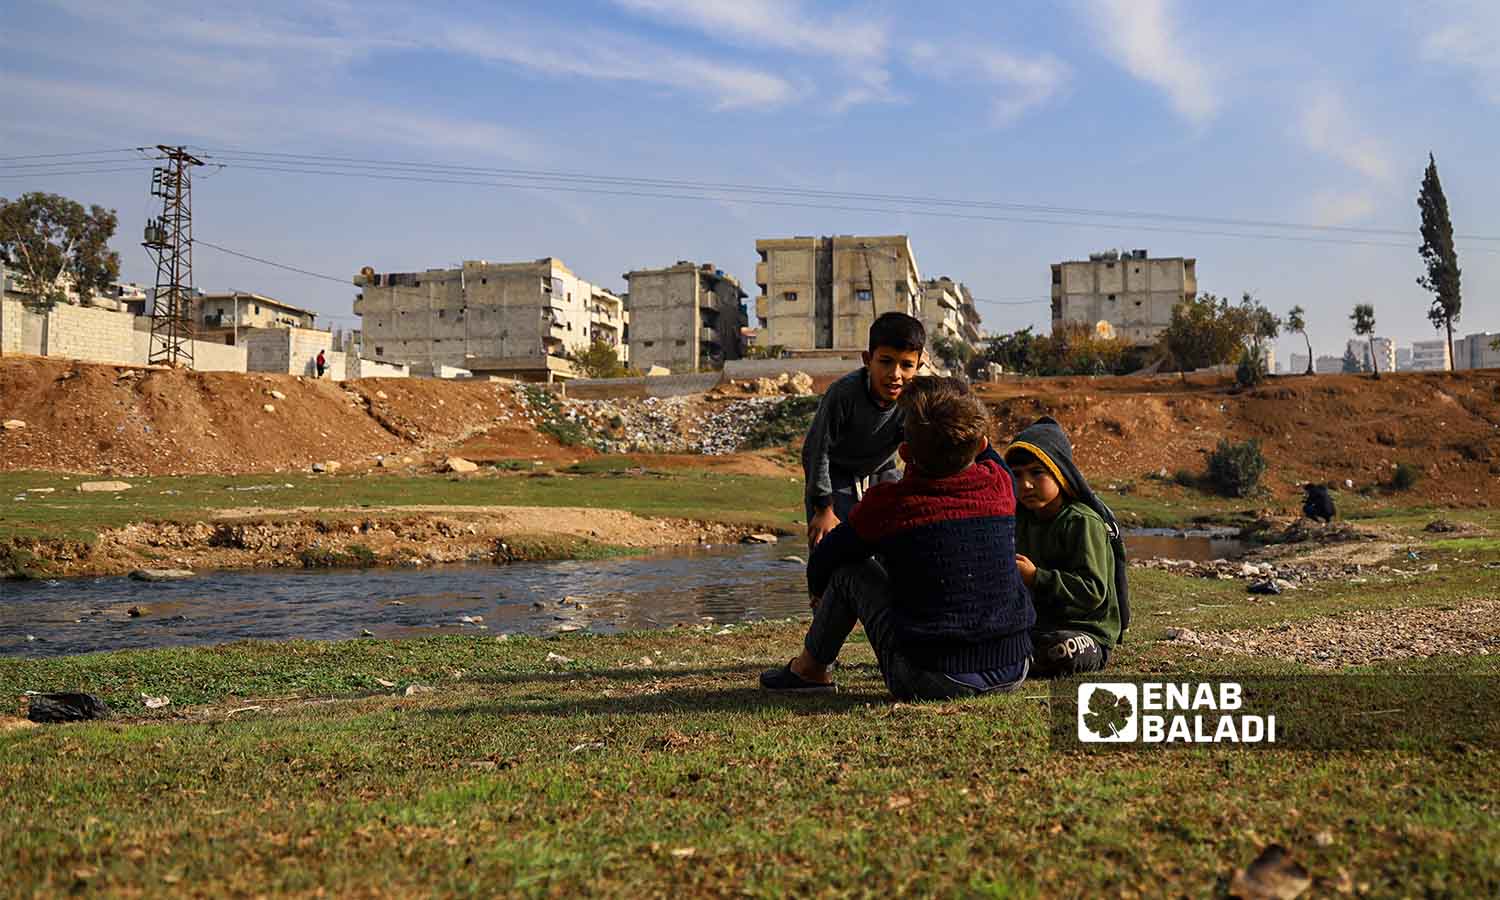 A group of children playing near the Afrin River that is polluted with sewage and factory waste - December 12, 2022 (Enab Baladi/Amir Kharboutli)